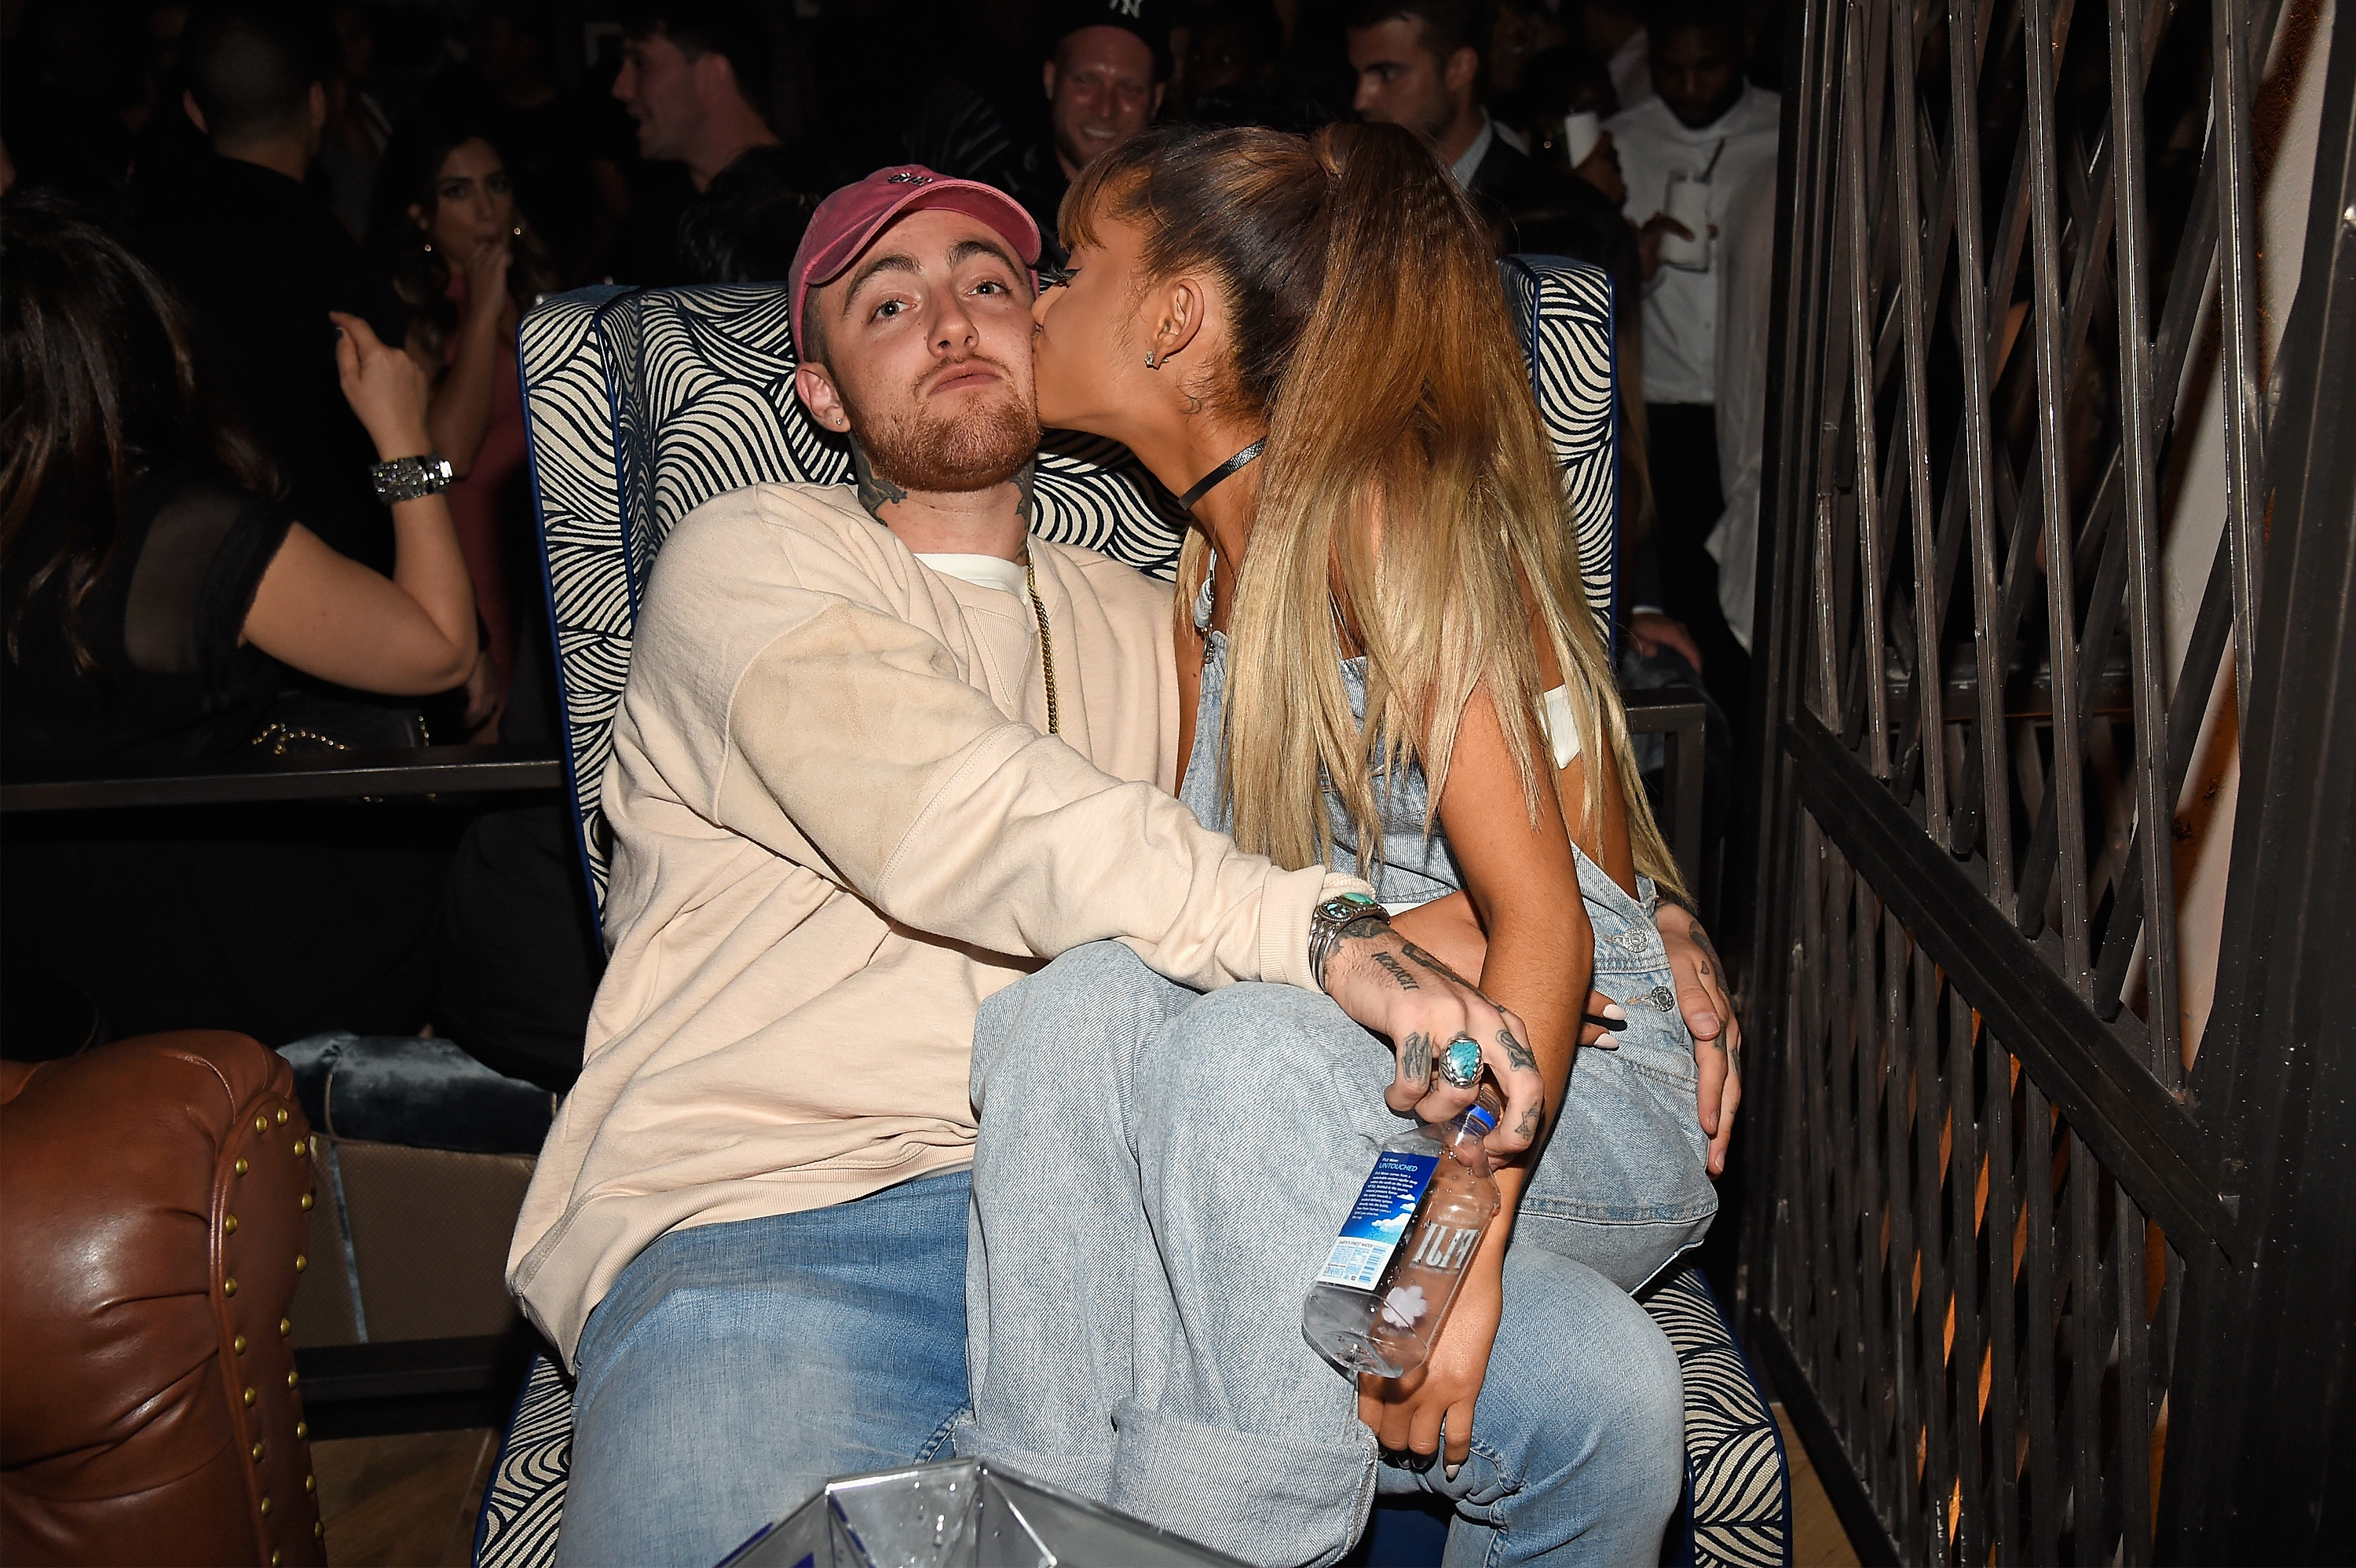 Mac Miller and Ariana Grande during the Republic Records 2016 VMA afterparty at Vandal on August 28, 2016 in New York | Source: Getty Images